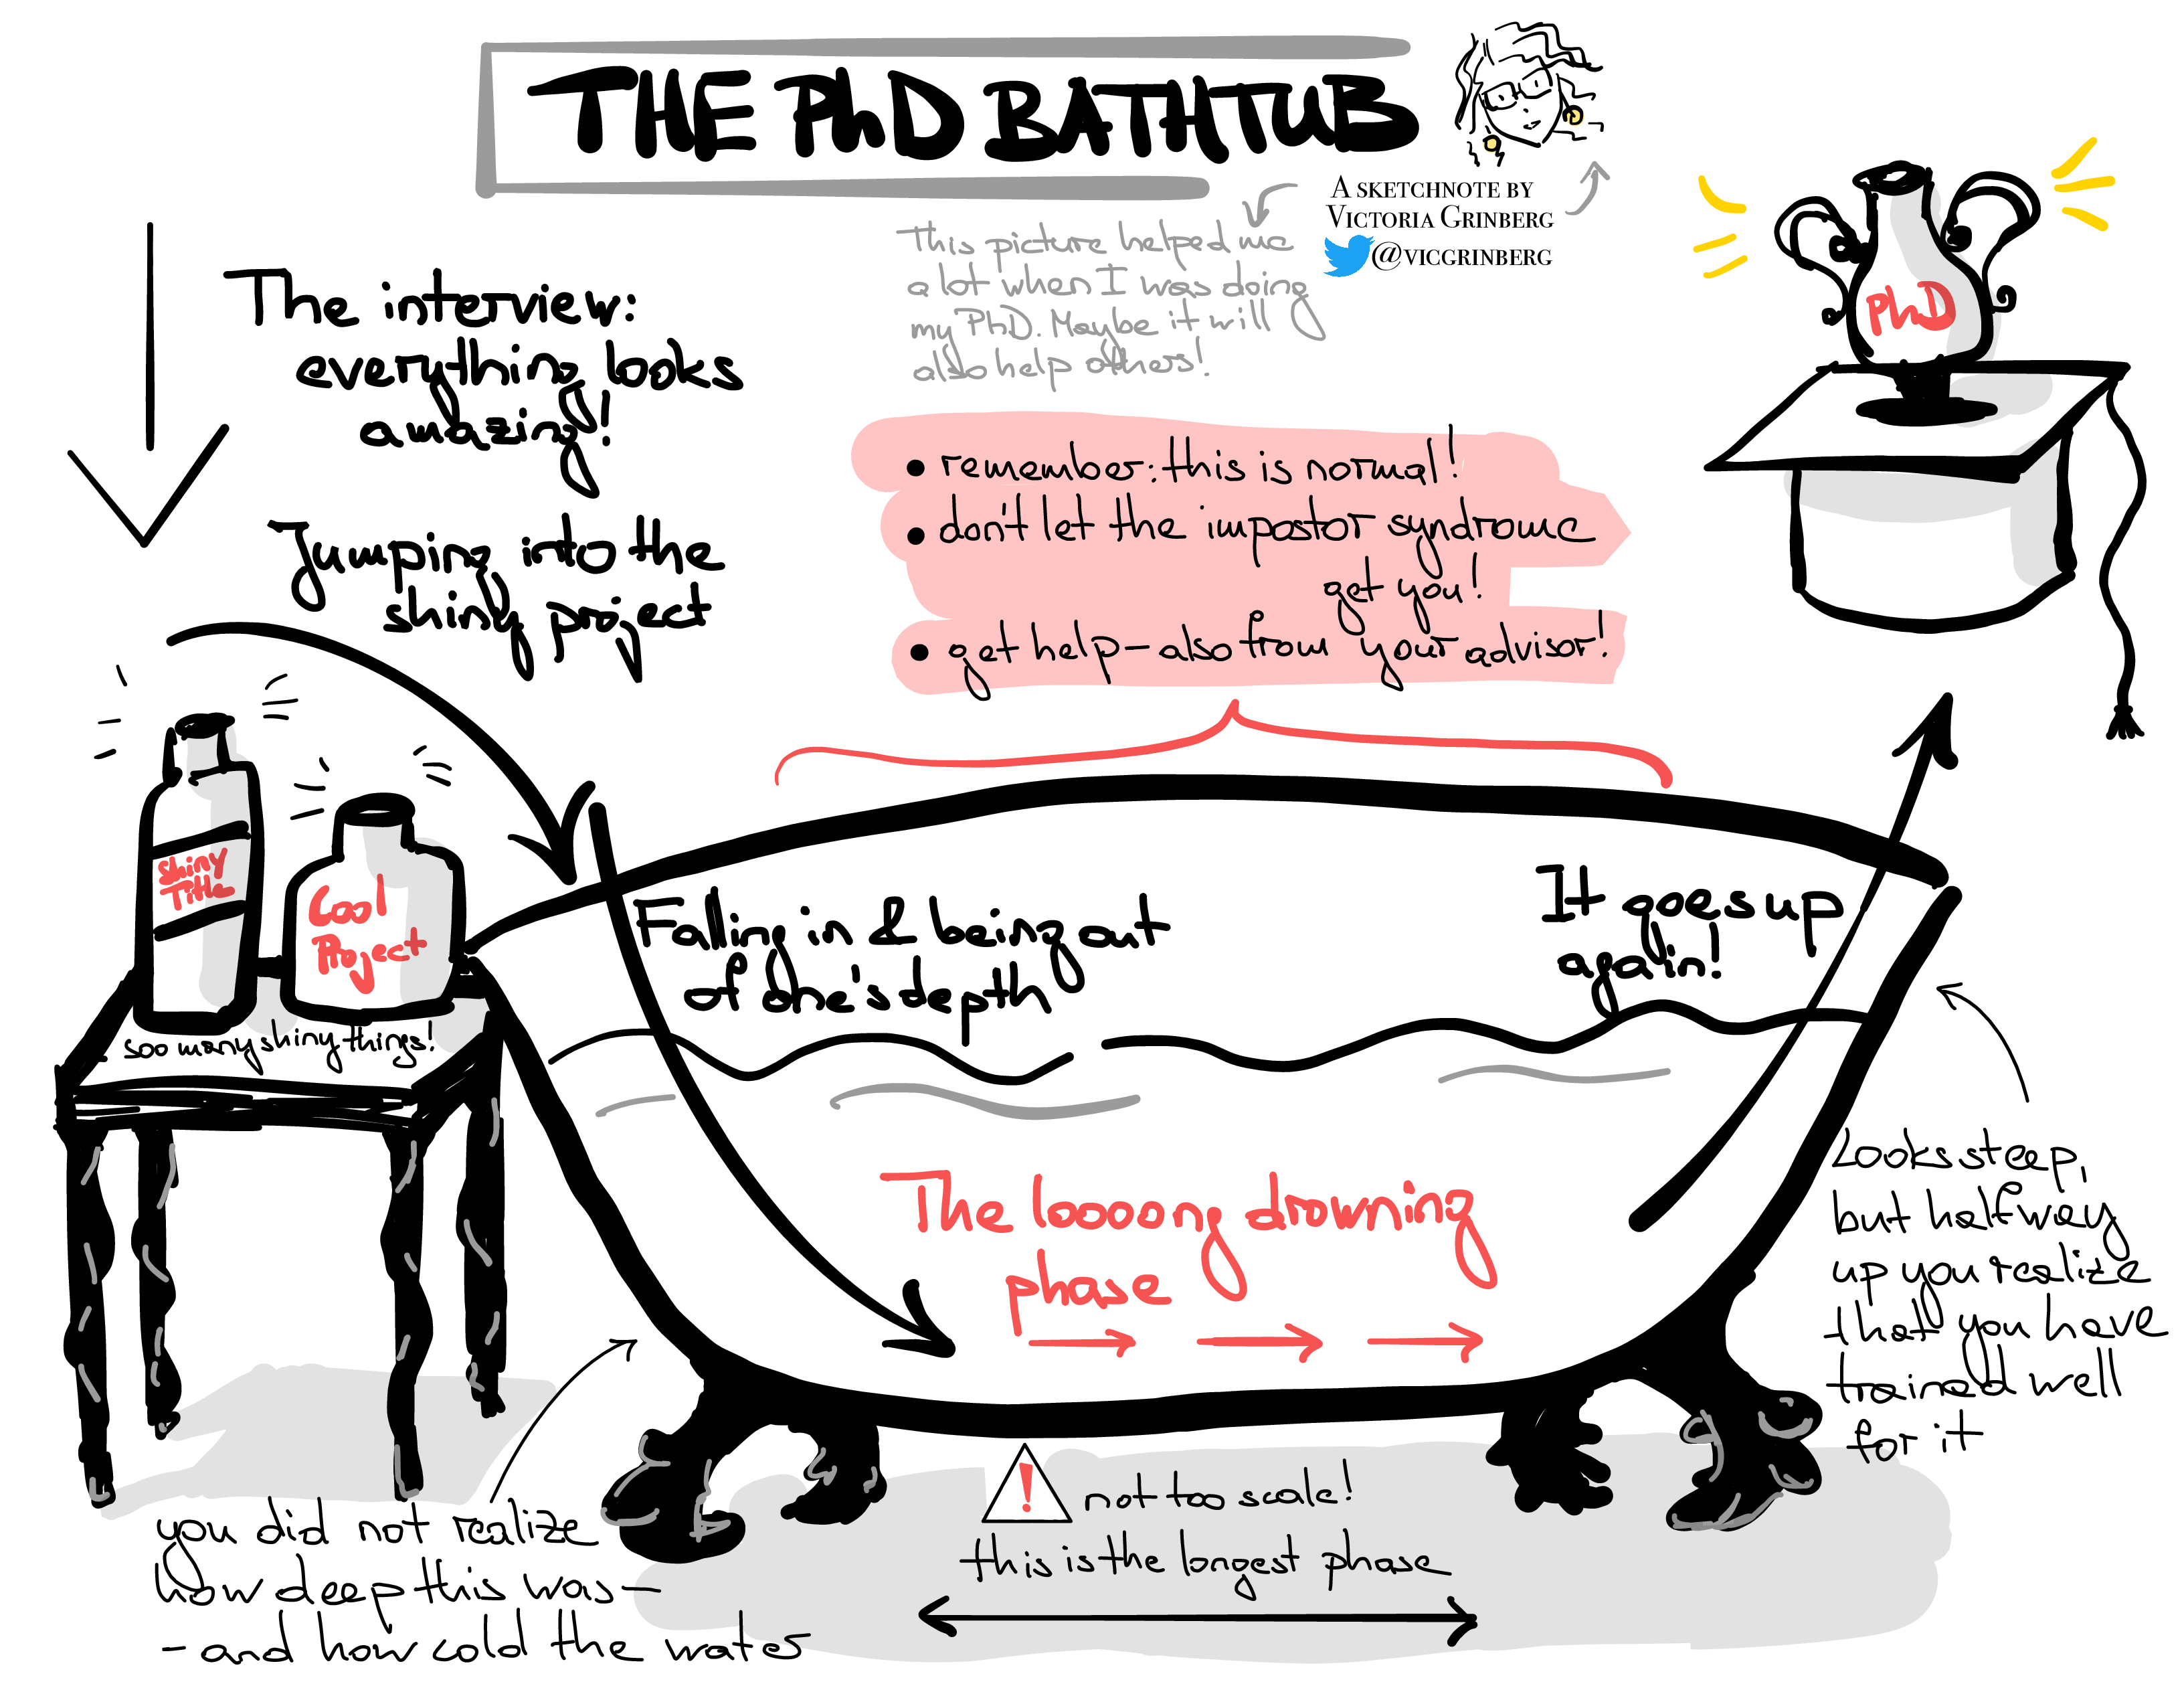 A sketch of a bathtub: with arrows showing:1. Jumping into the shiny project (all the nice bath stuff on the table next to the bathtub)2. Falling in & being out of one's depth (you did not realize how deep this was - and how cold the water)3. The looong drowning phase at the bottom of the bathtub - the longest phase of it all! (remember this is normal! don't let the imposter syndrome het you! get help - also from your advisor!)4. It goes up again! (the end of the bathtub - looks steep but halfway up you realized that you have trained well for it!)5. The actual PhD - you win!